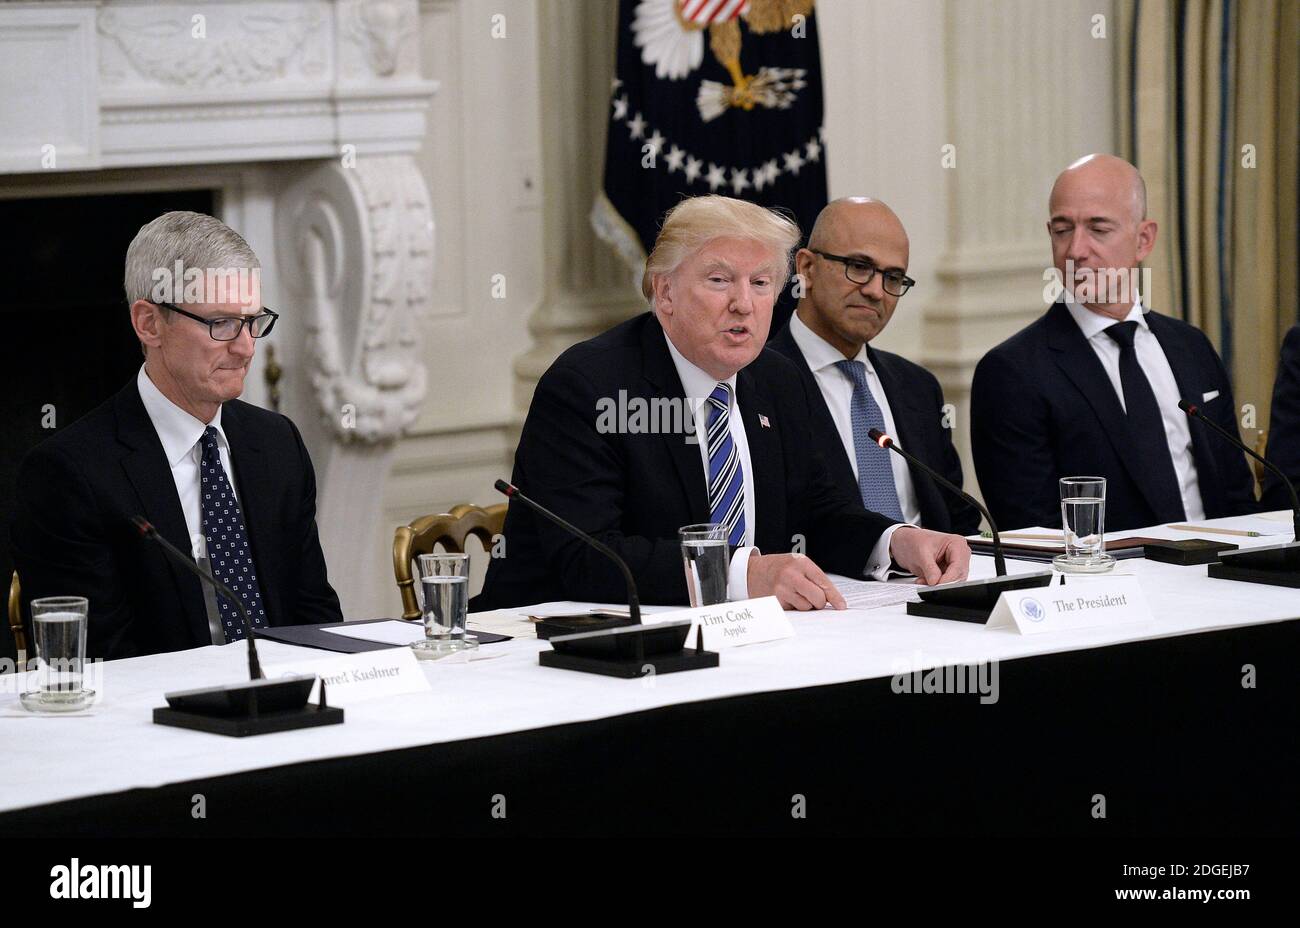 L-R) CEO of Apple Tim Cook , U.S. President Donald Trump, Microsoft CEO  Stya Nadella and Amazon CEO Jeff Bezos attend a meeting of the American  Technology Council in the State Dining